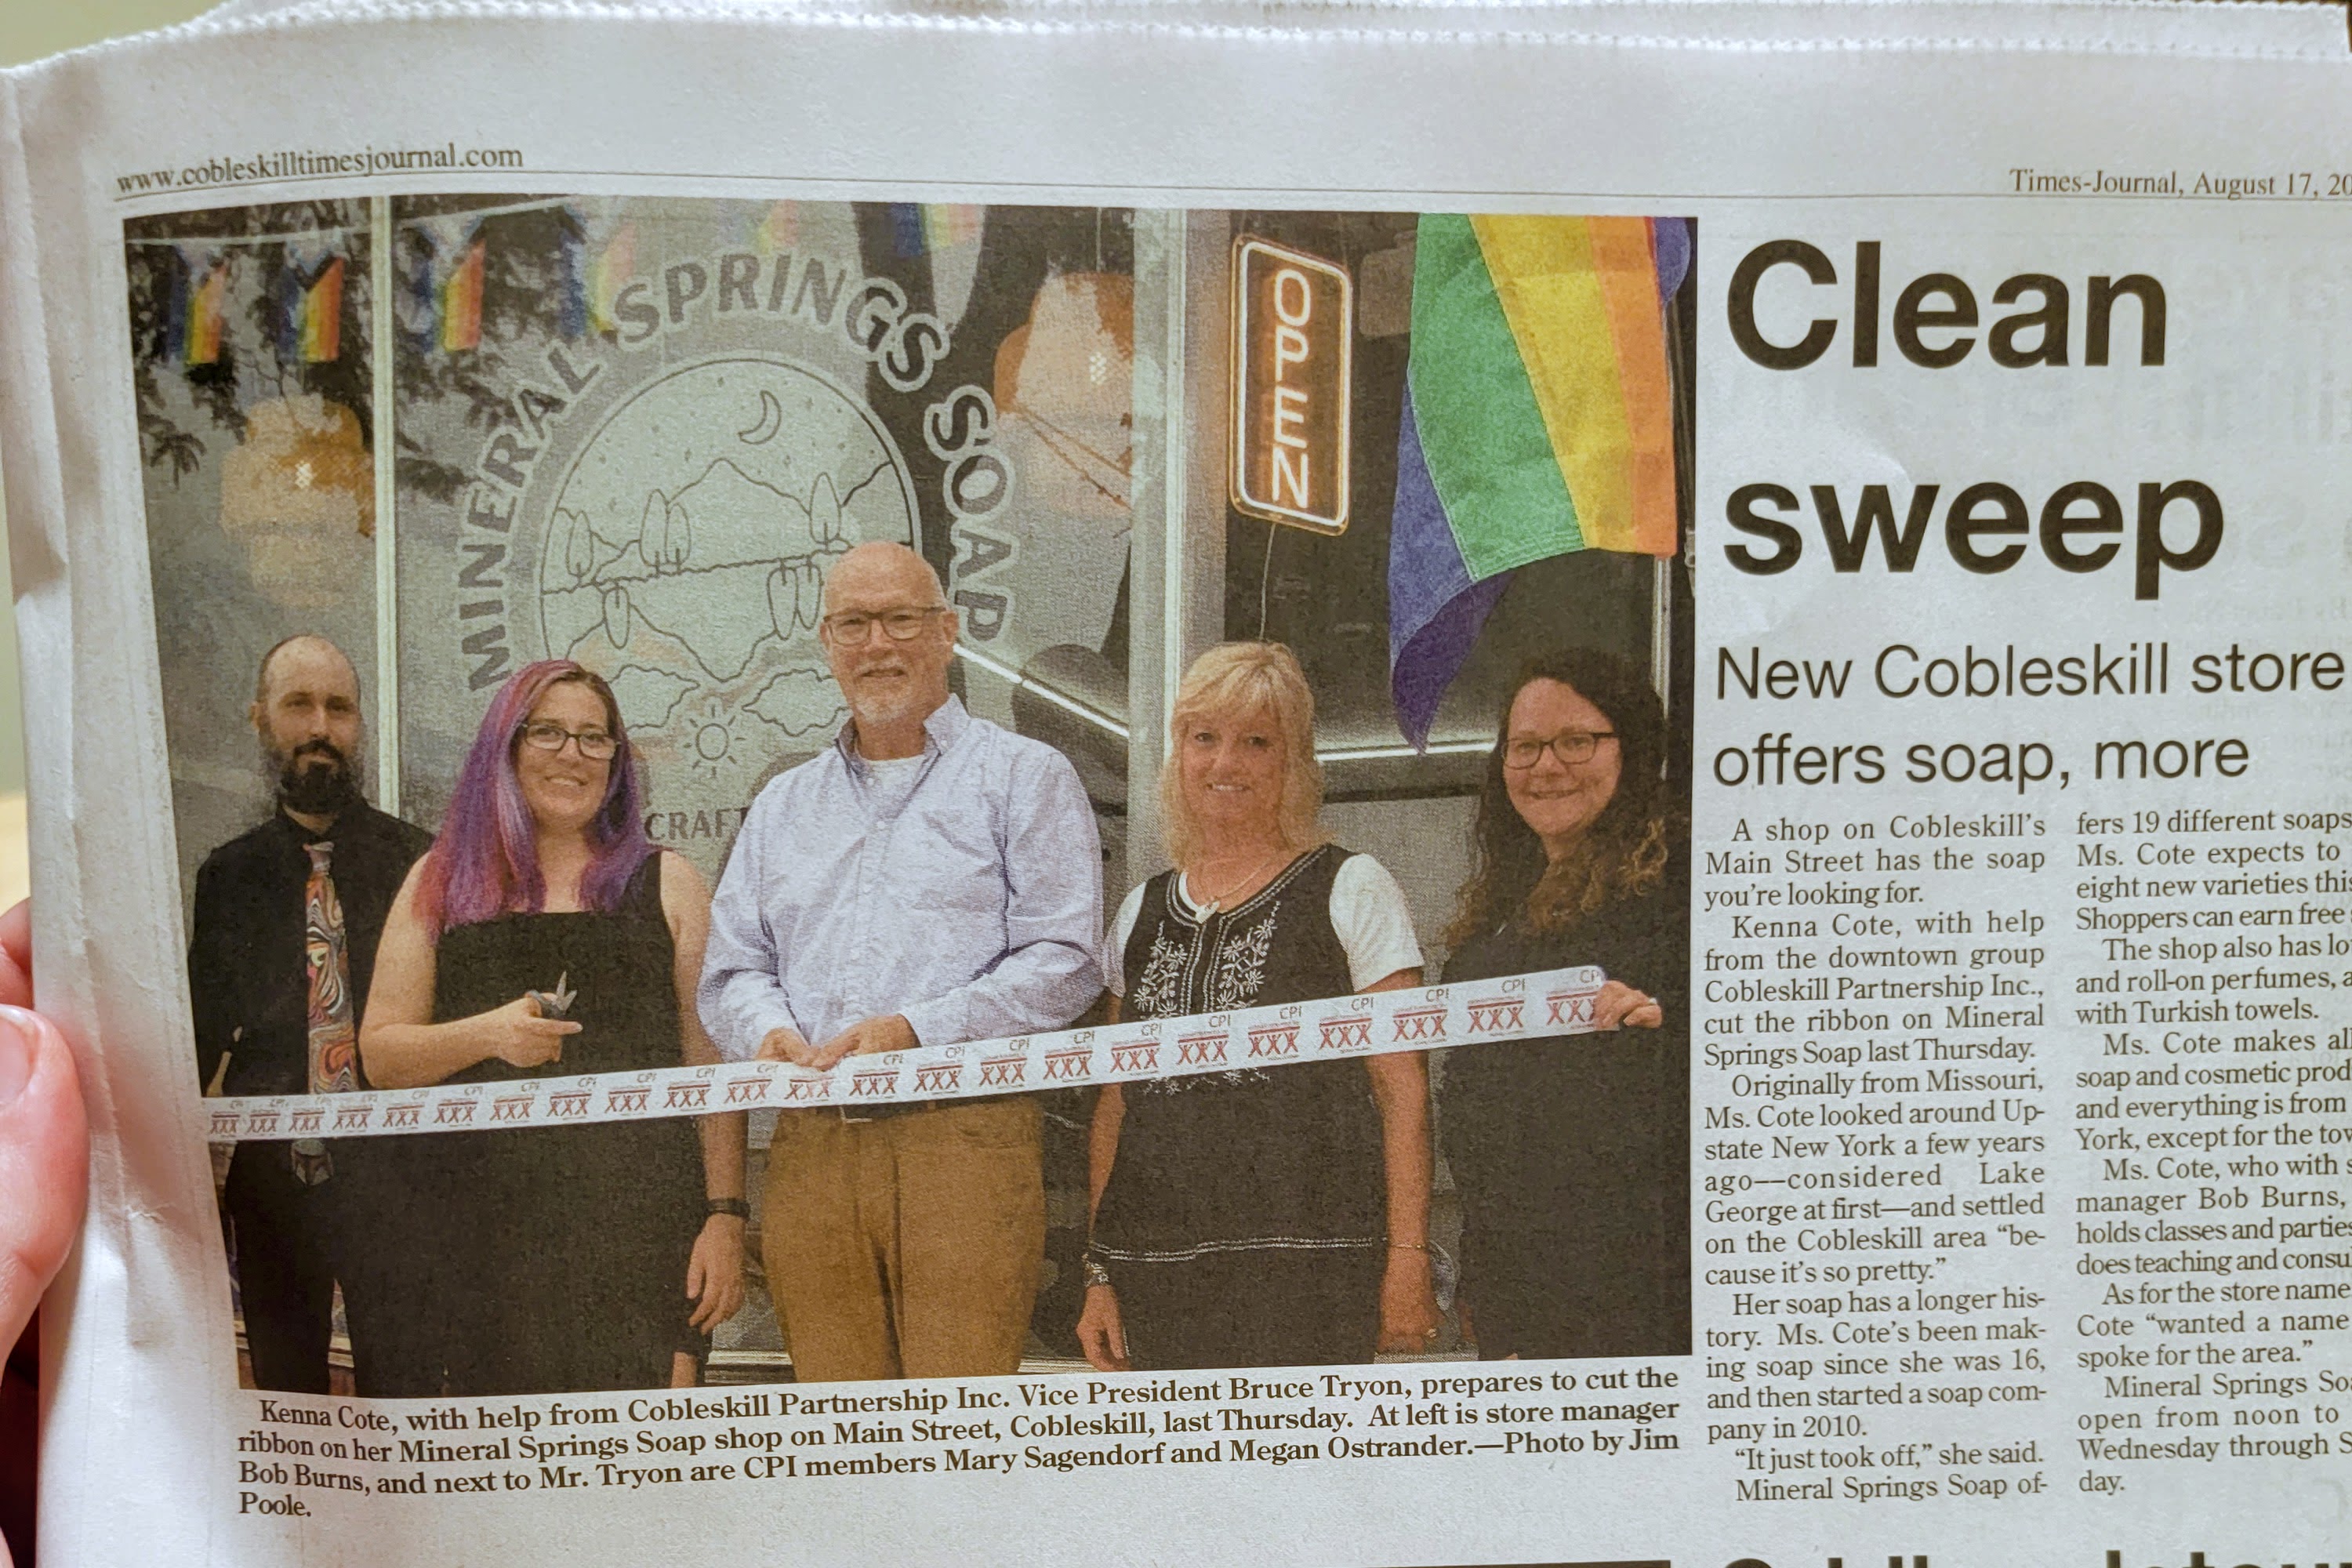 Newspaper article about the storefront in a local newspaper